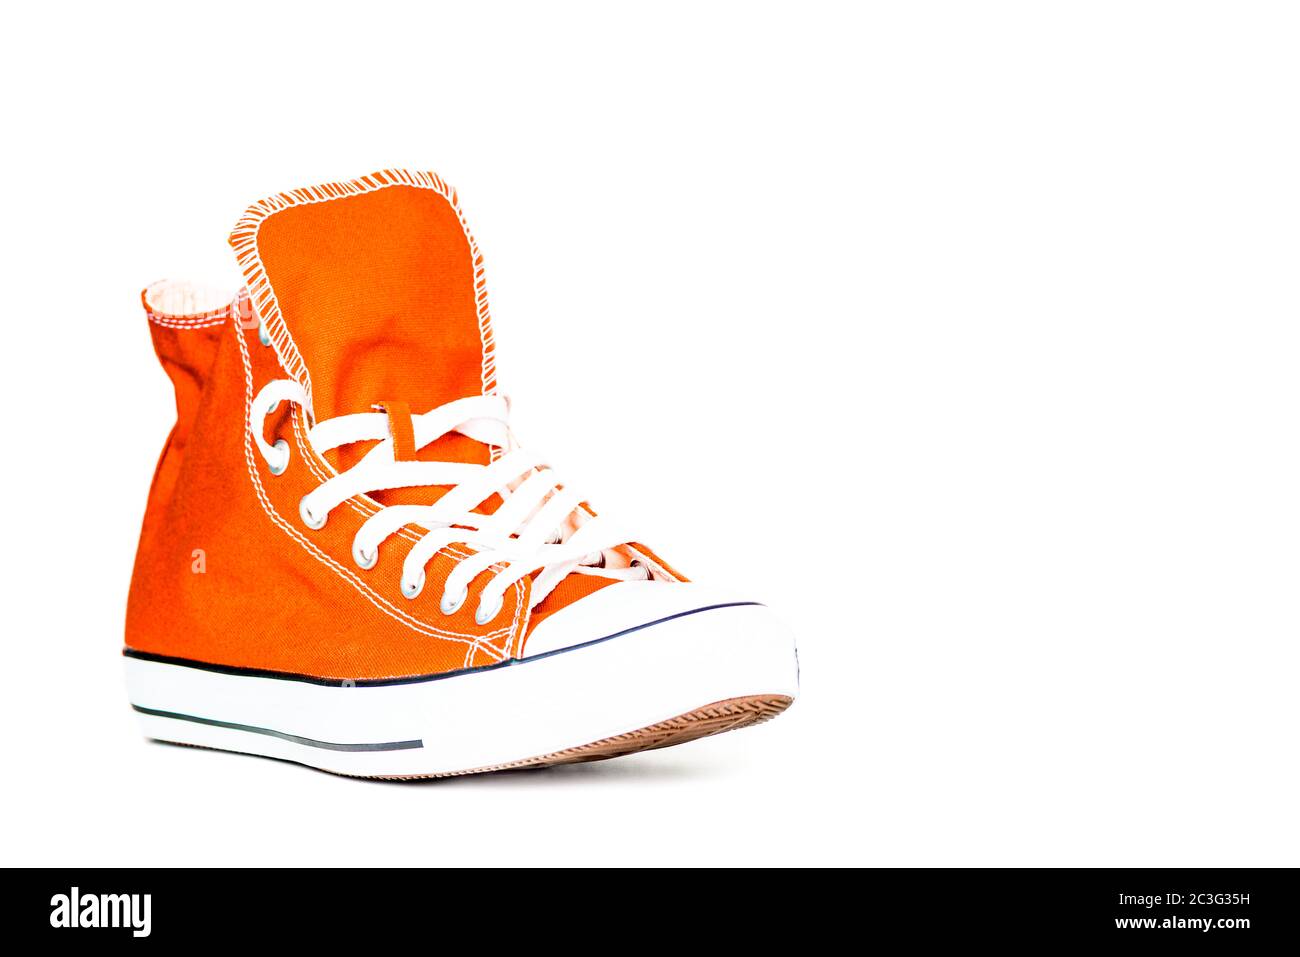 Sneaker isolated on white background Stock Photo